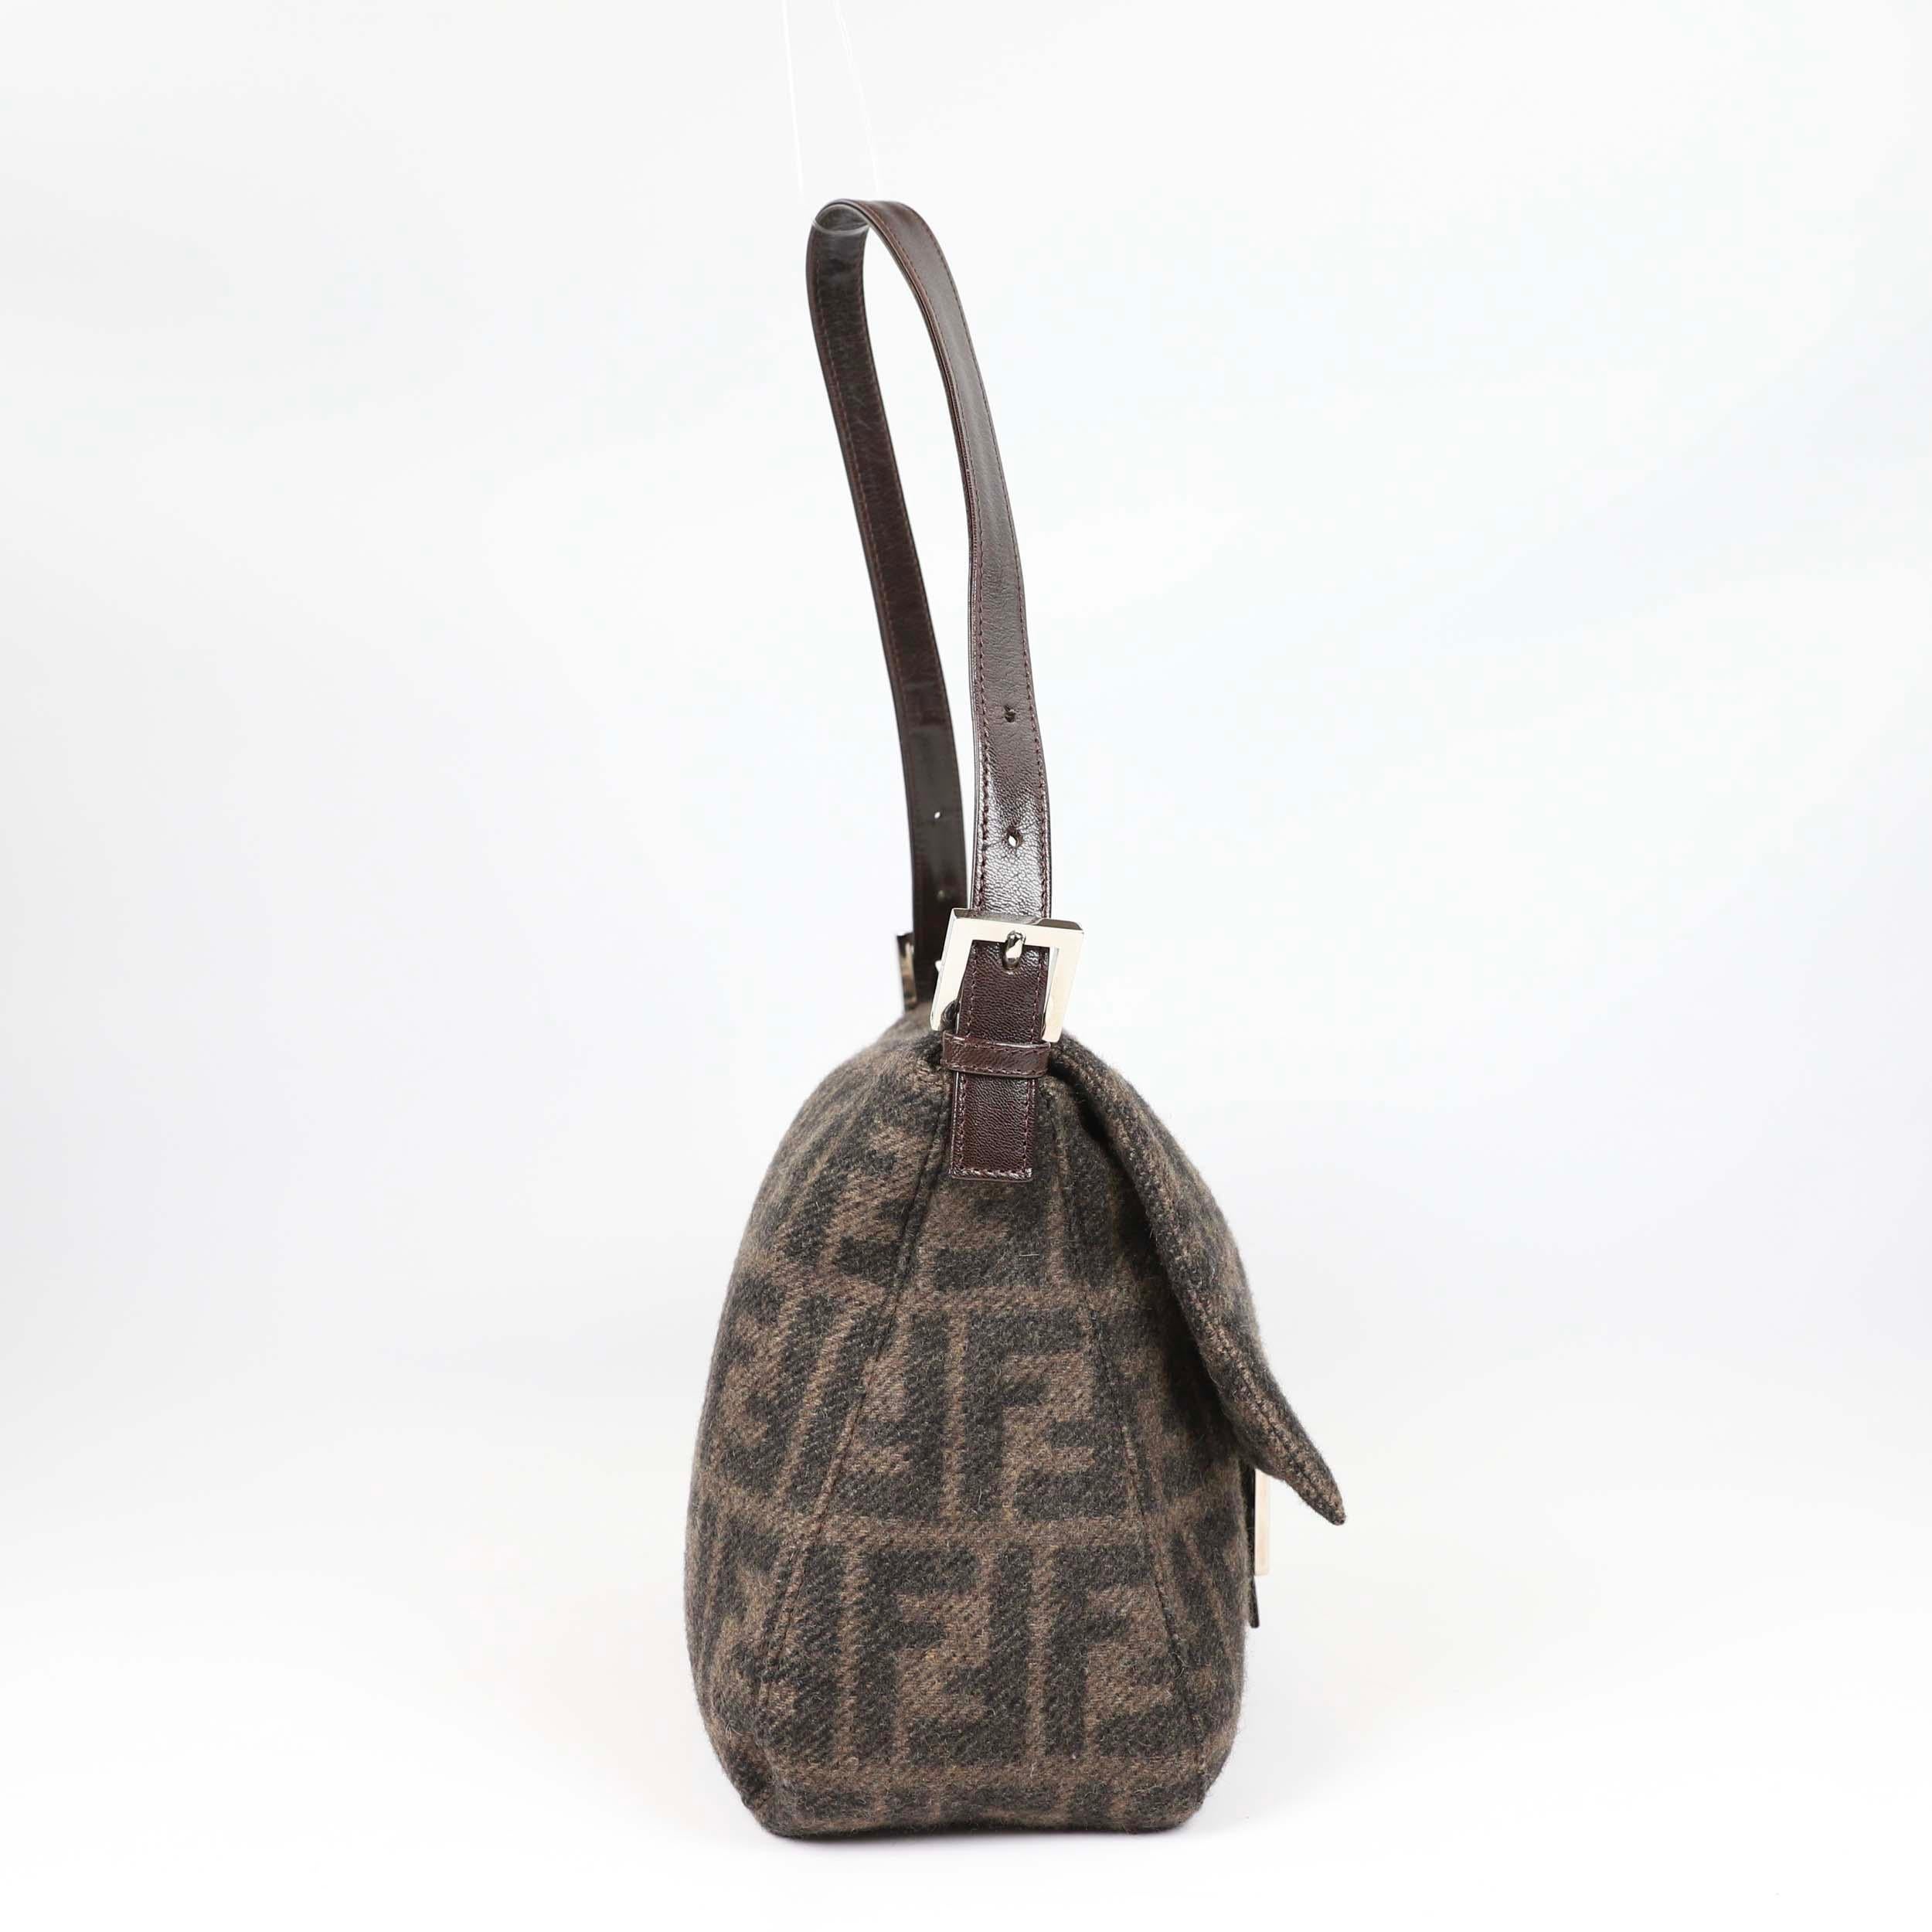 This is a FENDI Mama Baguette in iconic monogram pattern. This chic shoulder bag is made of fine wool. The bag features a detachable leather handle and a Fendi FF logo on the leather strap closure. It opens with a magnetic snap button to a fabric